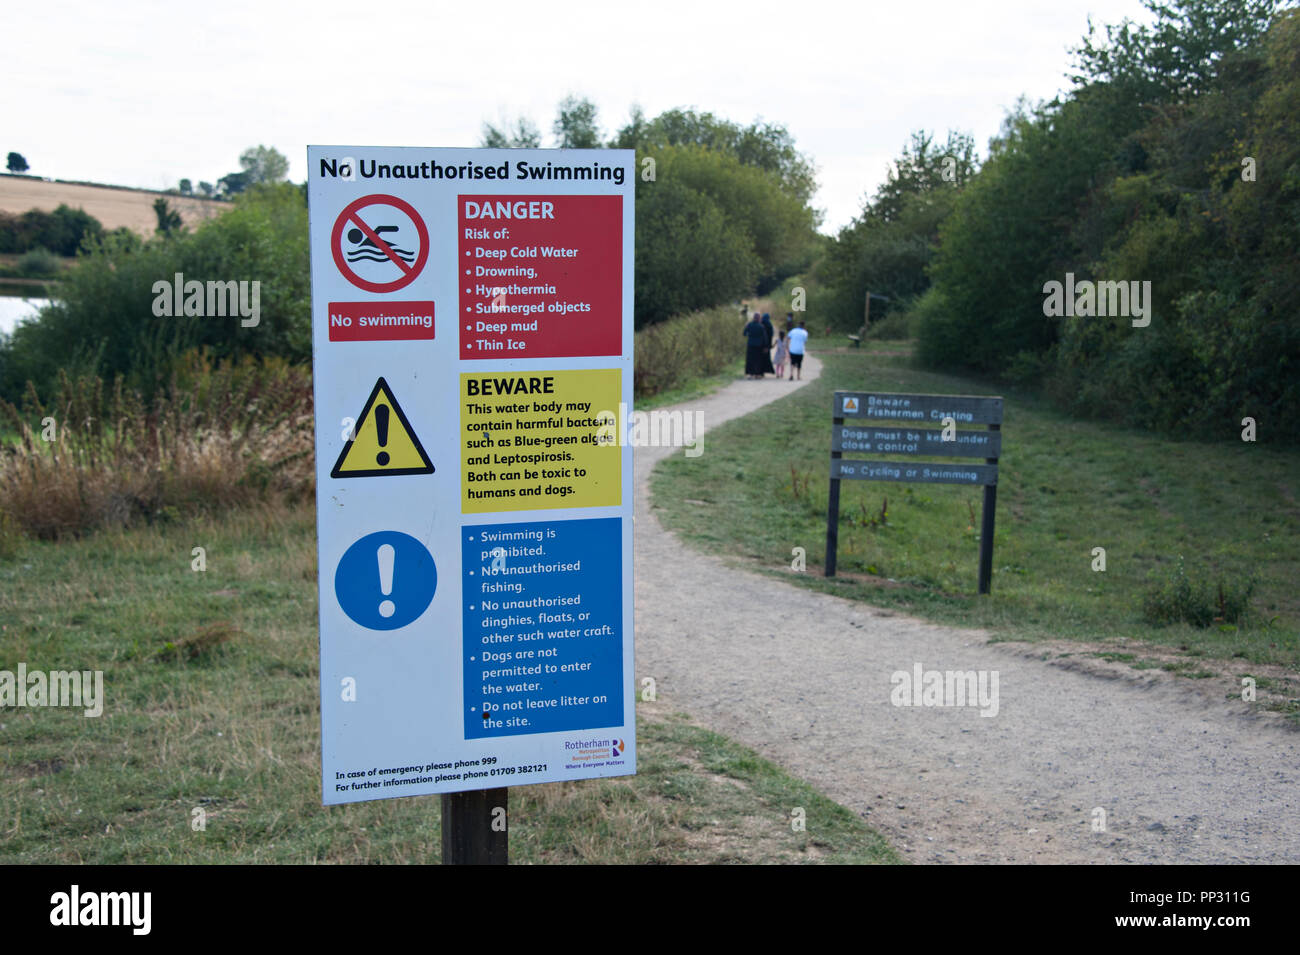 A Safety Notice for Parks and public conservation areas in Britain. Stock Photo